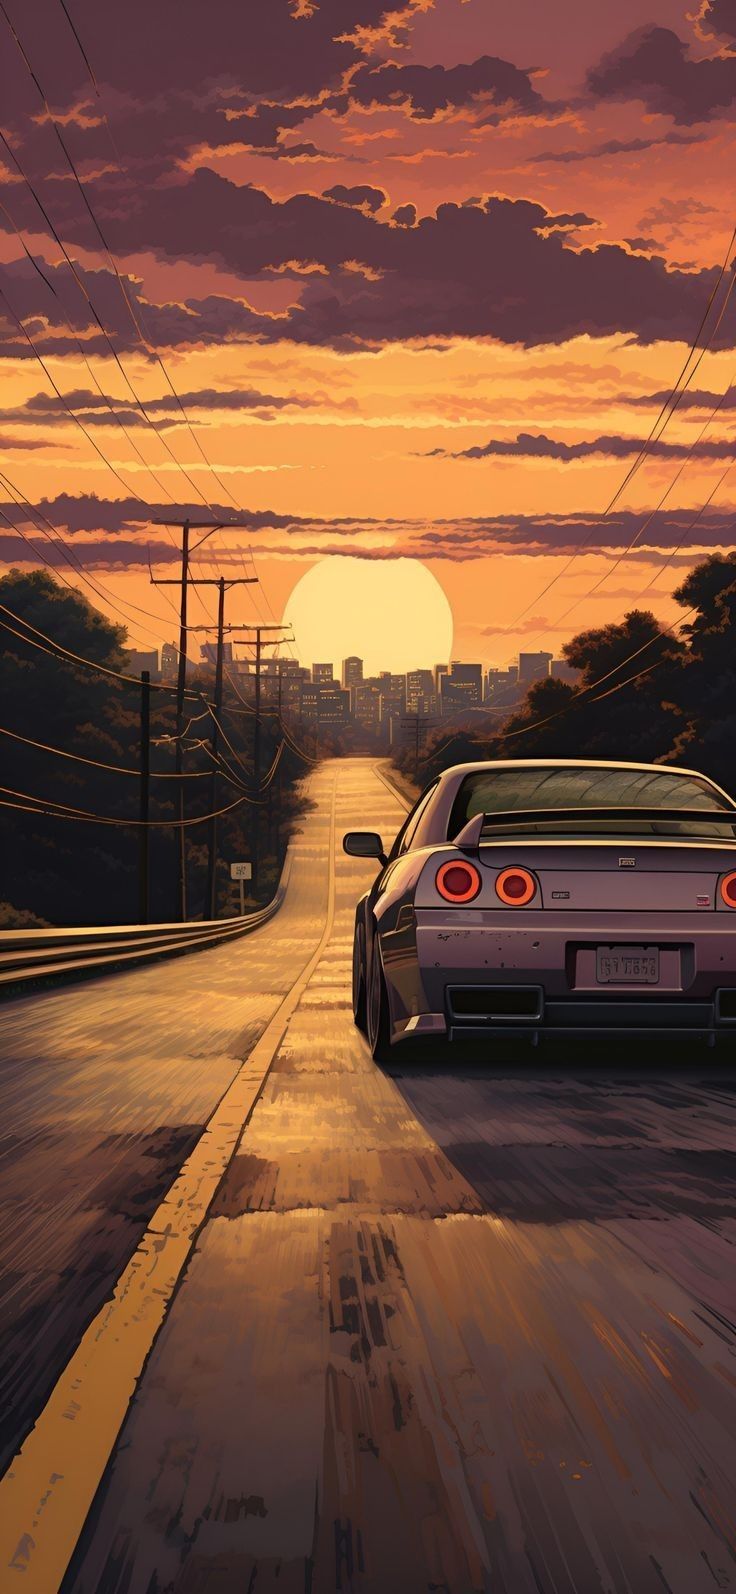 a painting of a car driving down the road in front of an orange and pink sunset